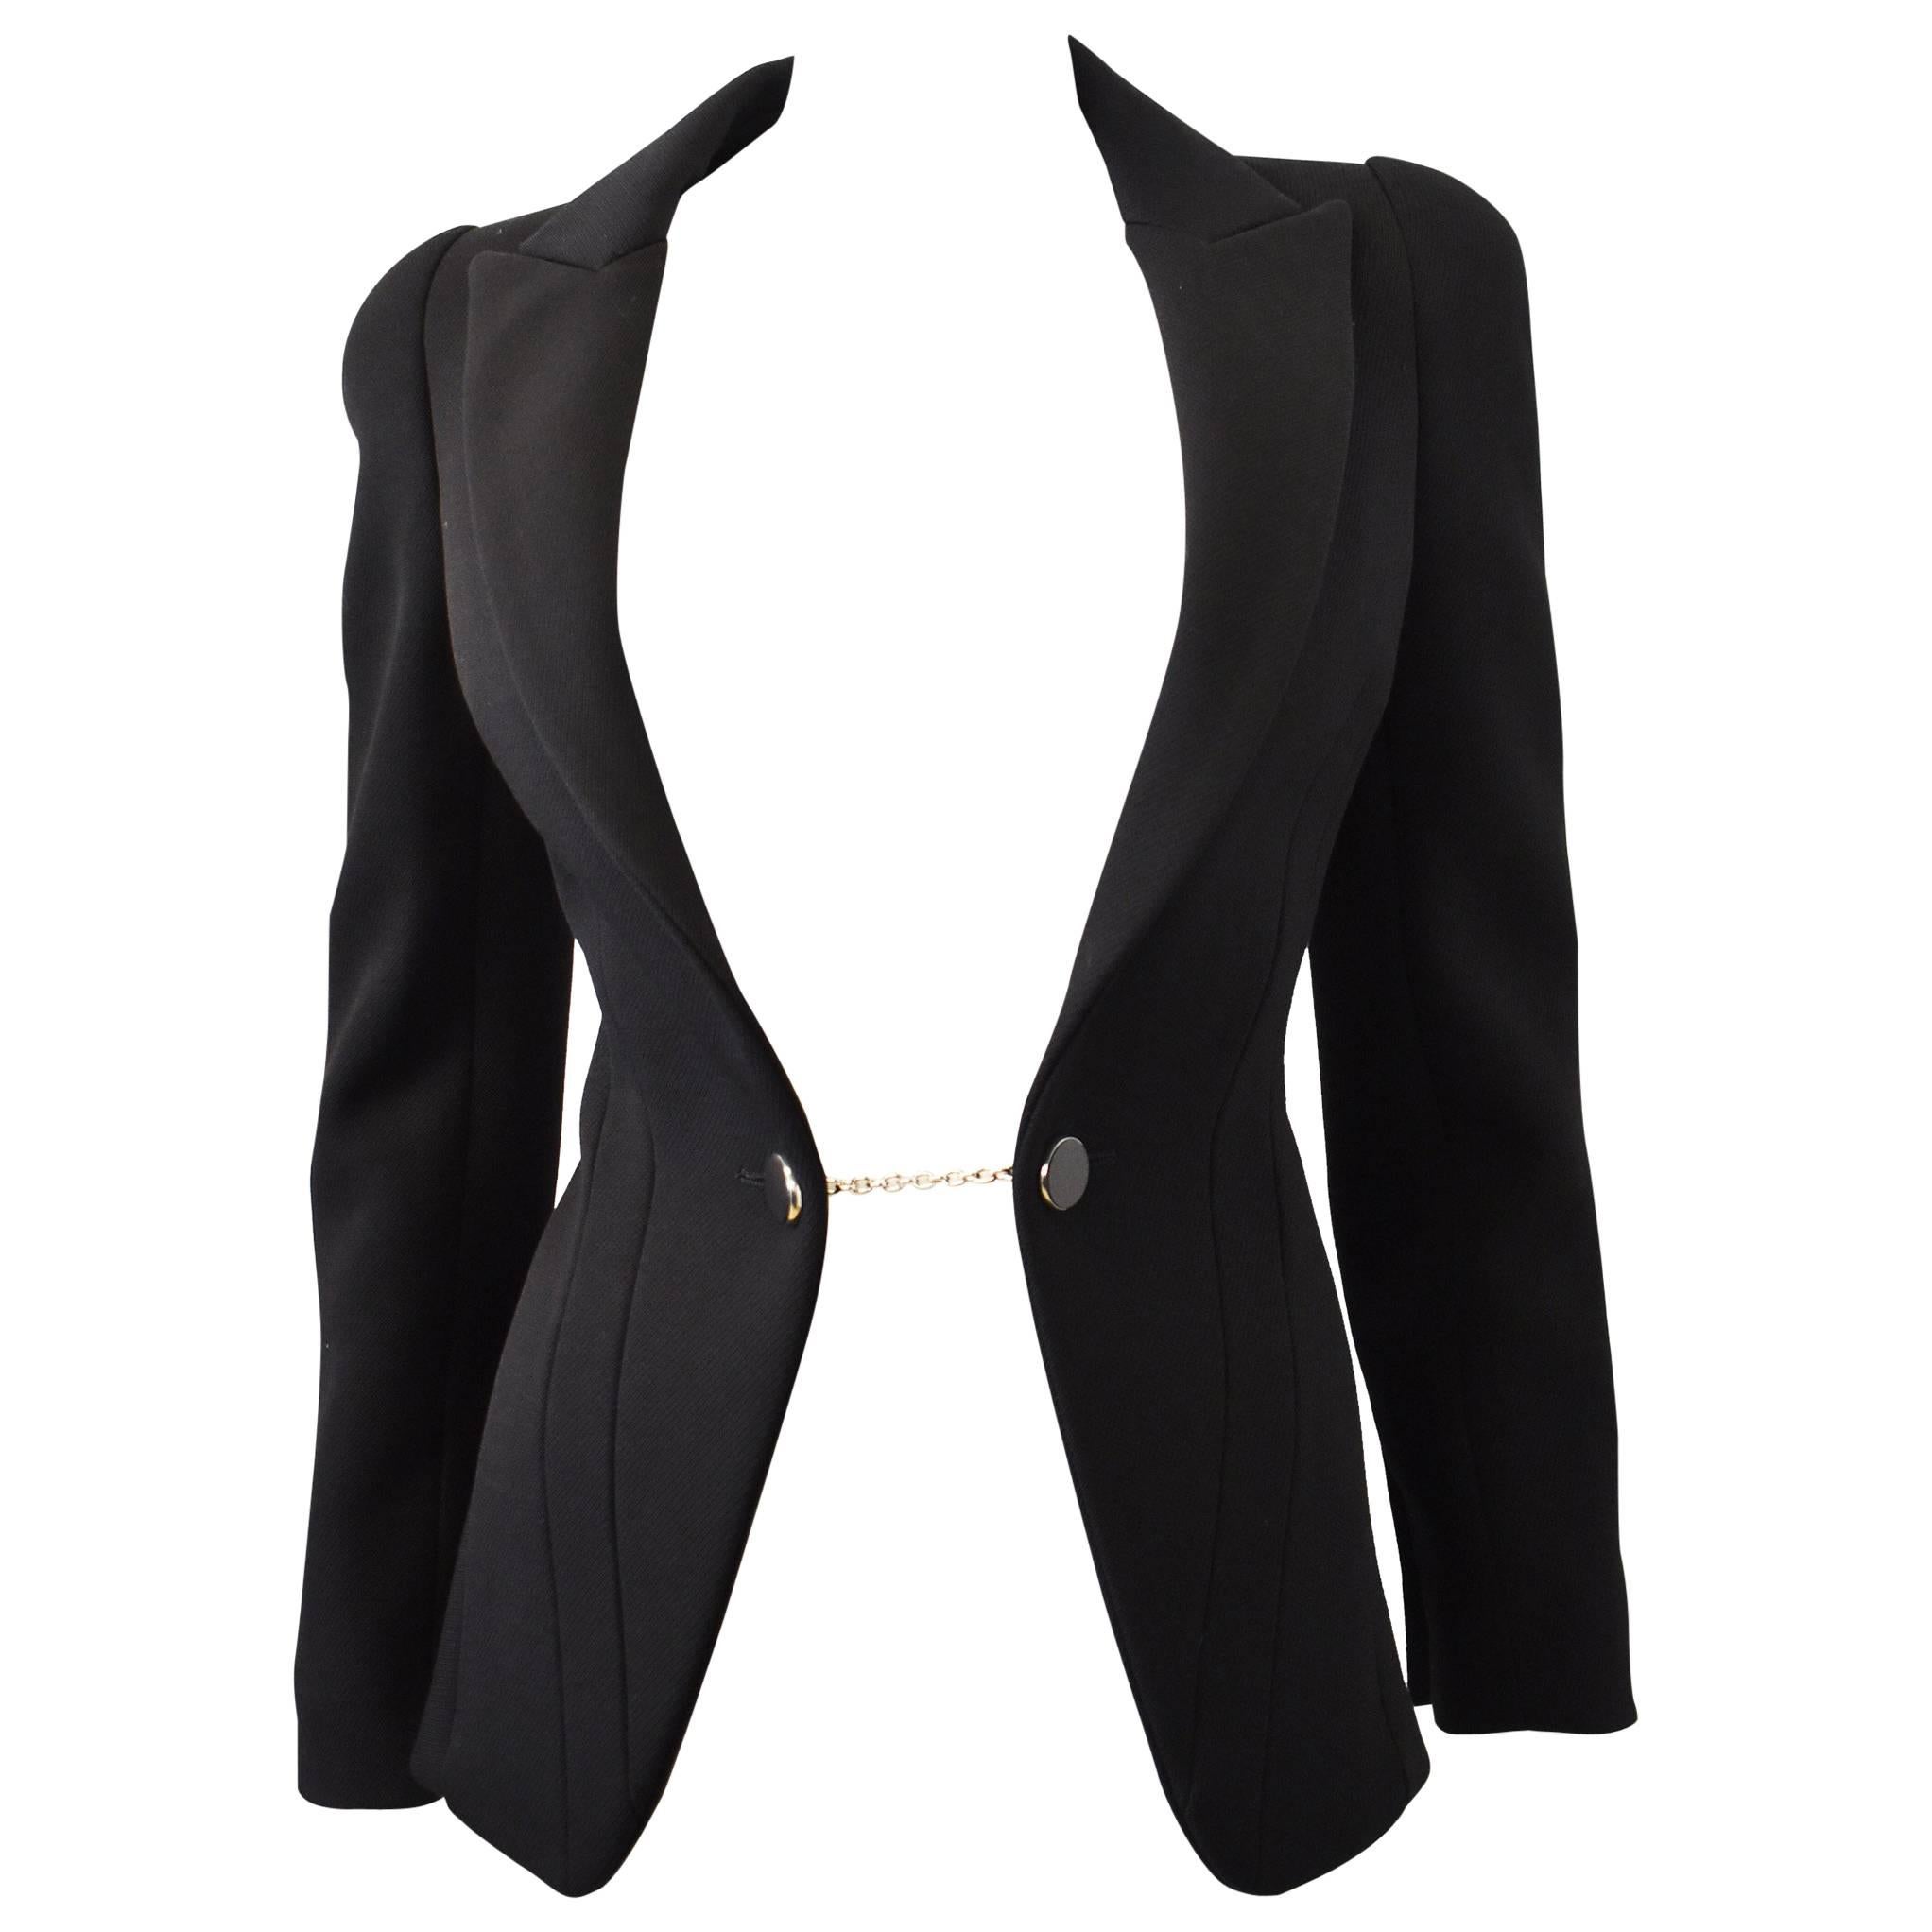 Alexander McQueen Black Fitted Jacket with ‘Cufflink’ Metal Fastening For Sale